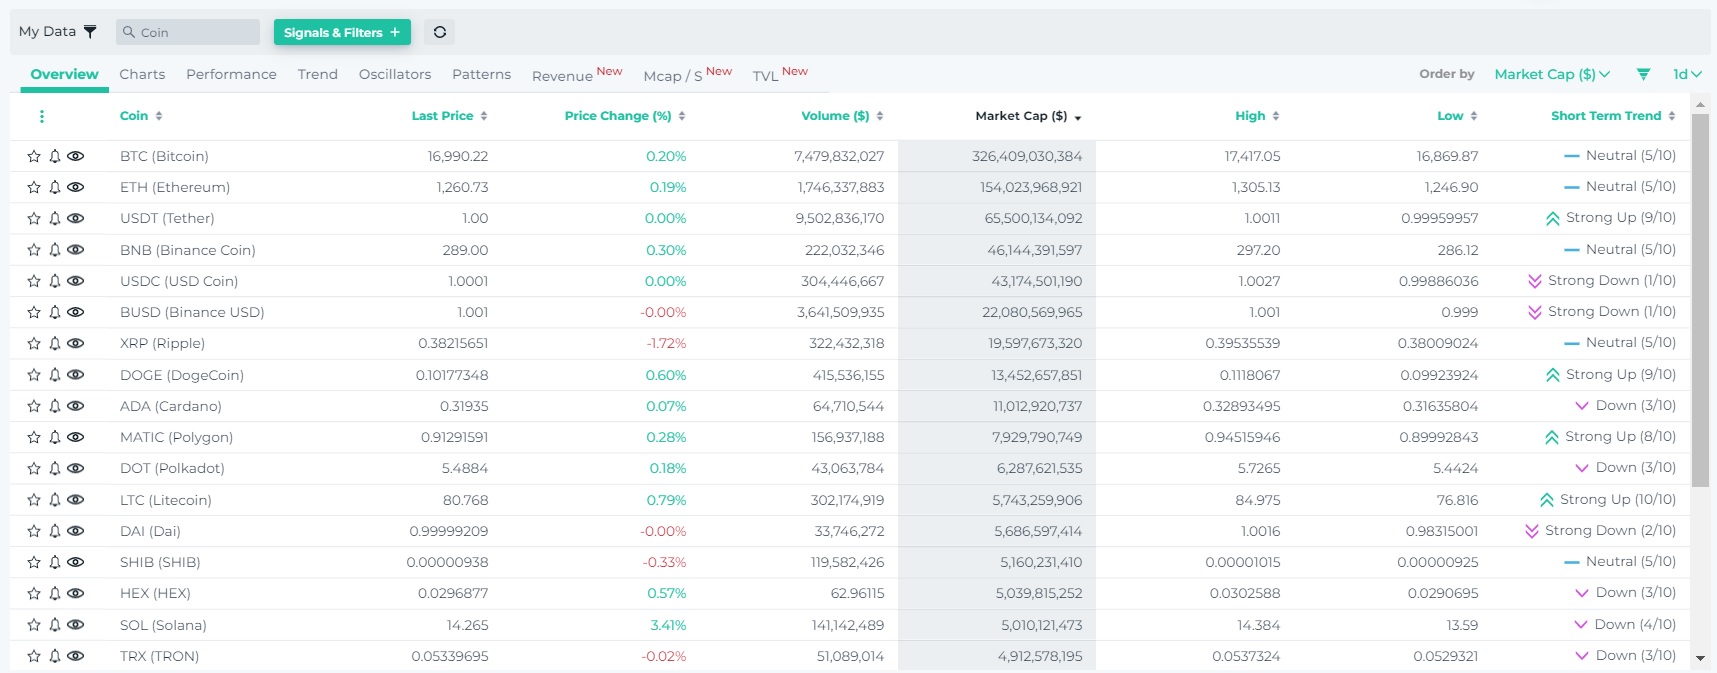 altFINS crypto market data and filters